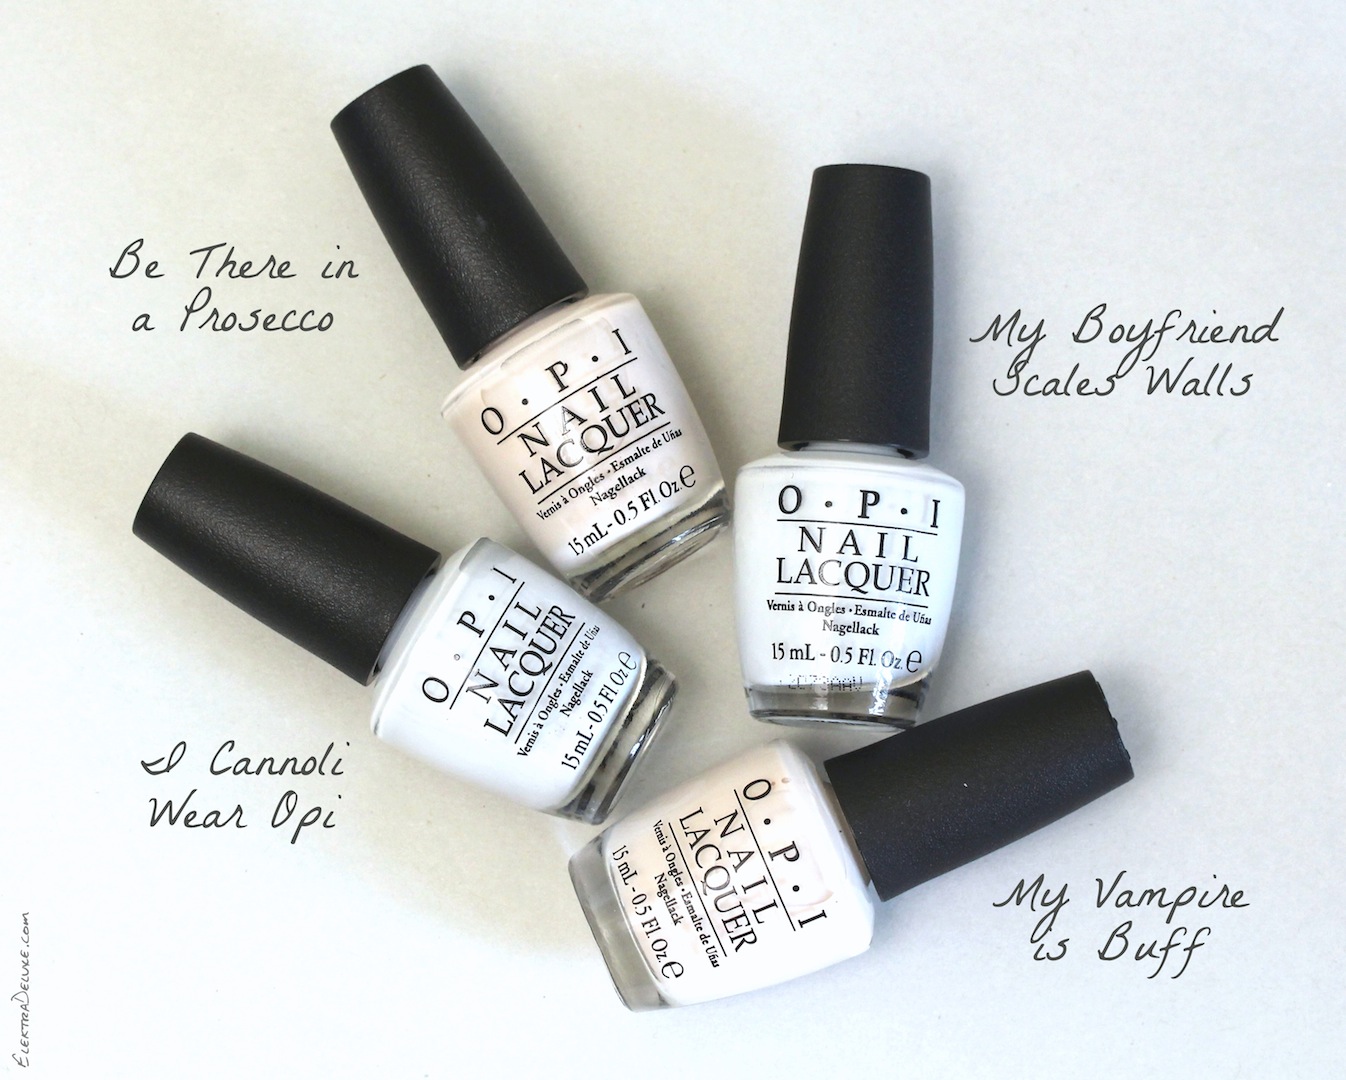 http://iphone.hlw.co.at/wp/wp-content/uploads/2015/09/0-opi-off-whites.jpg